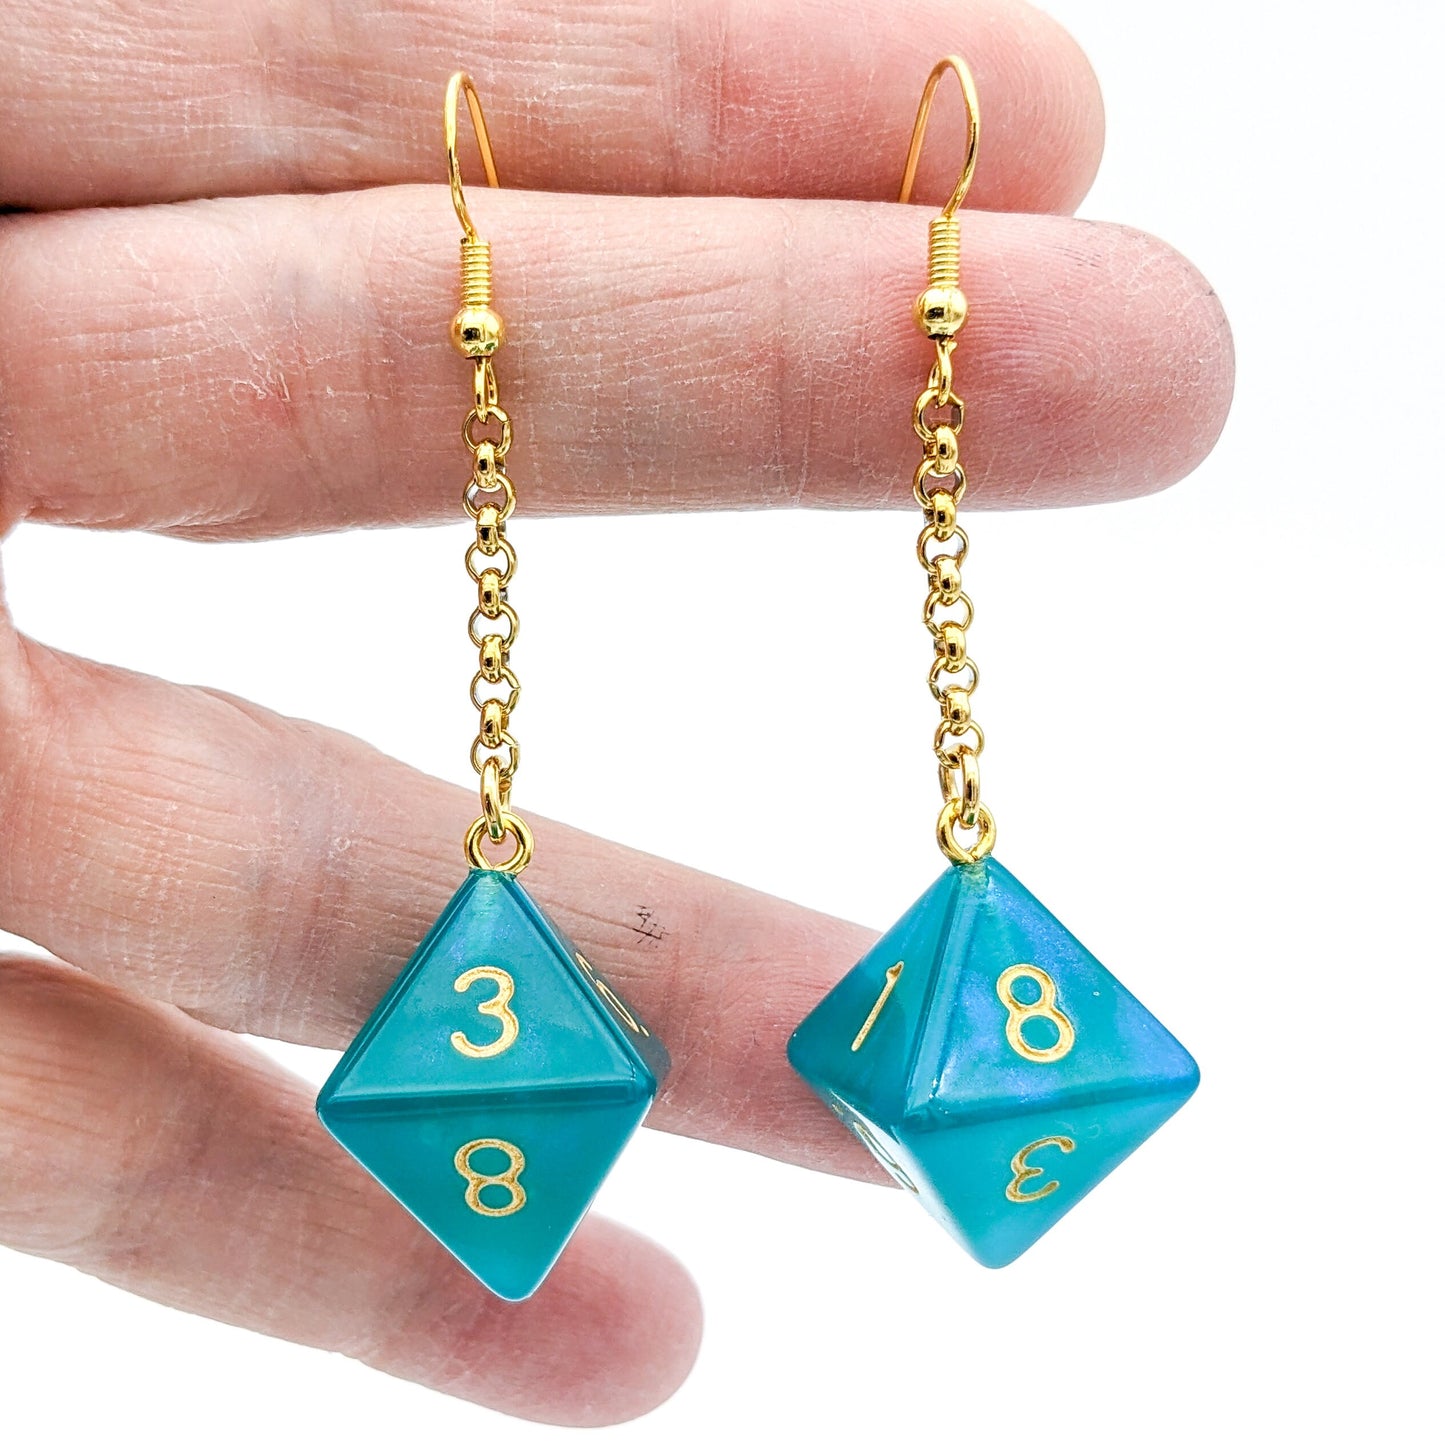 Colorful D8 Dice Earrings - DND Polyhedral Dice